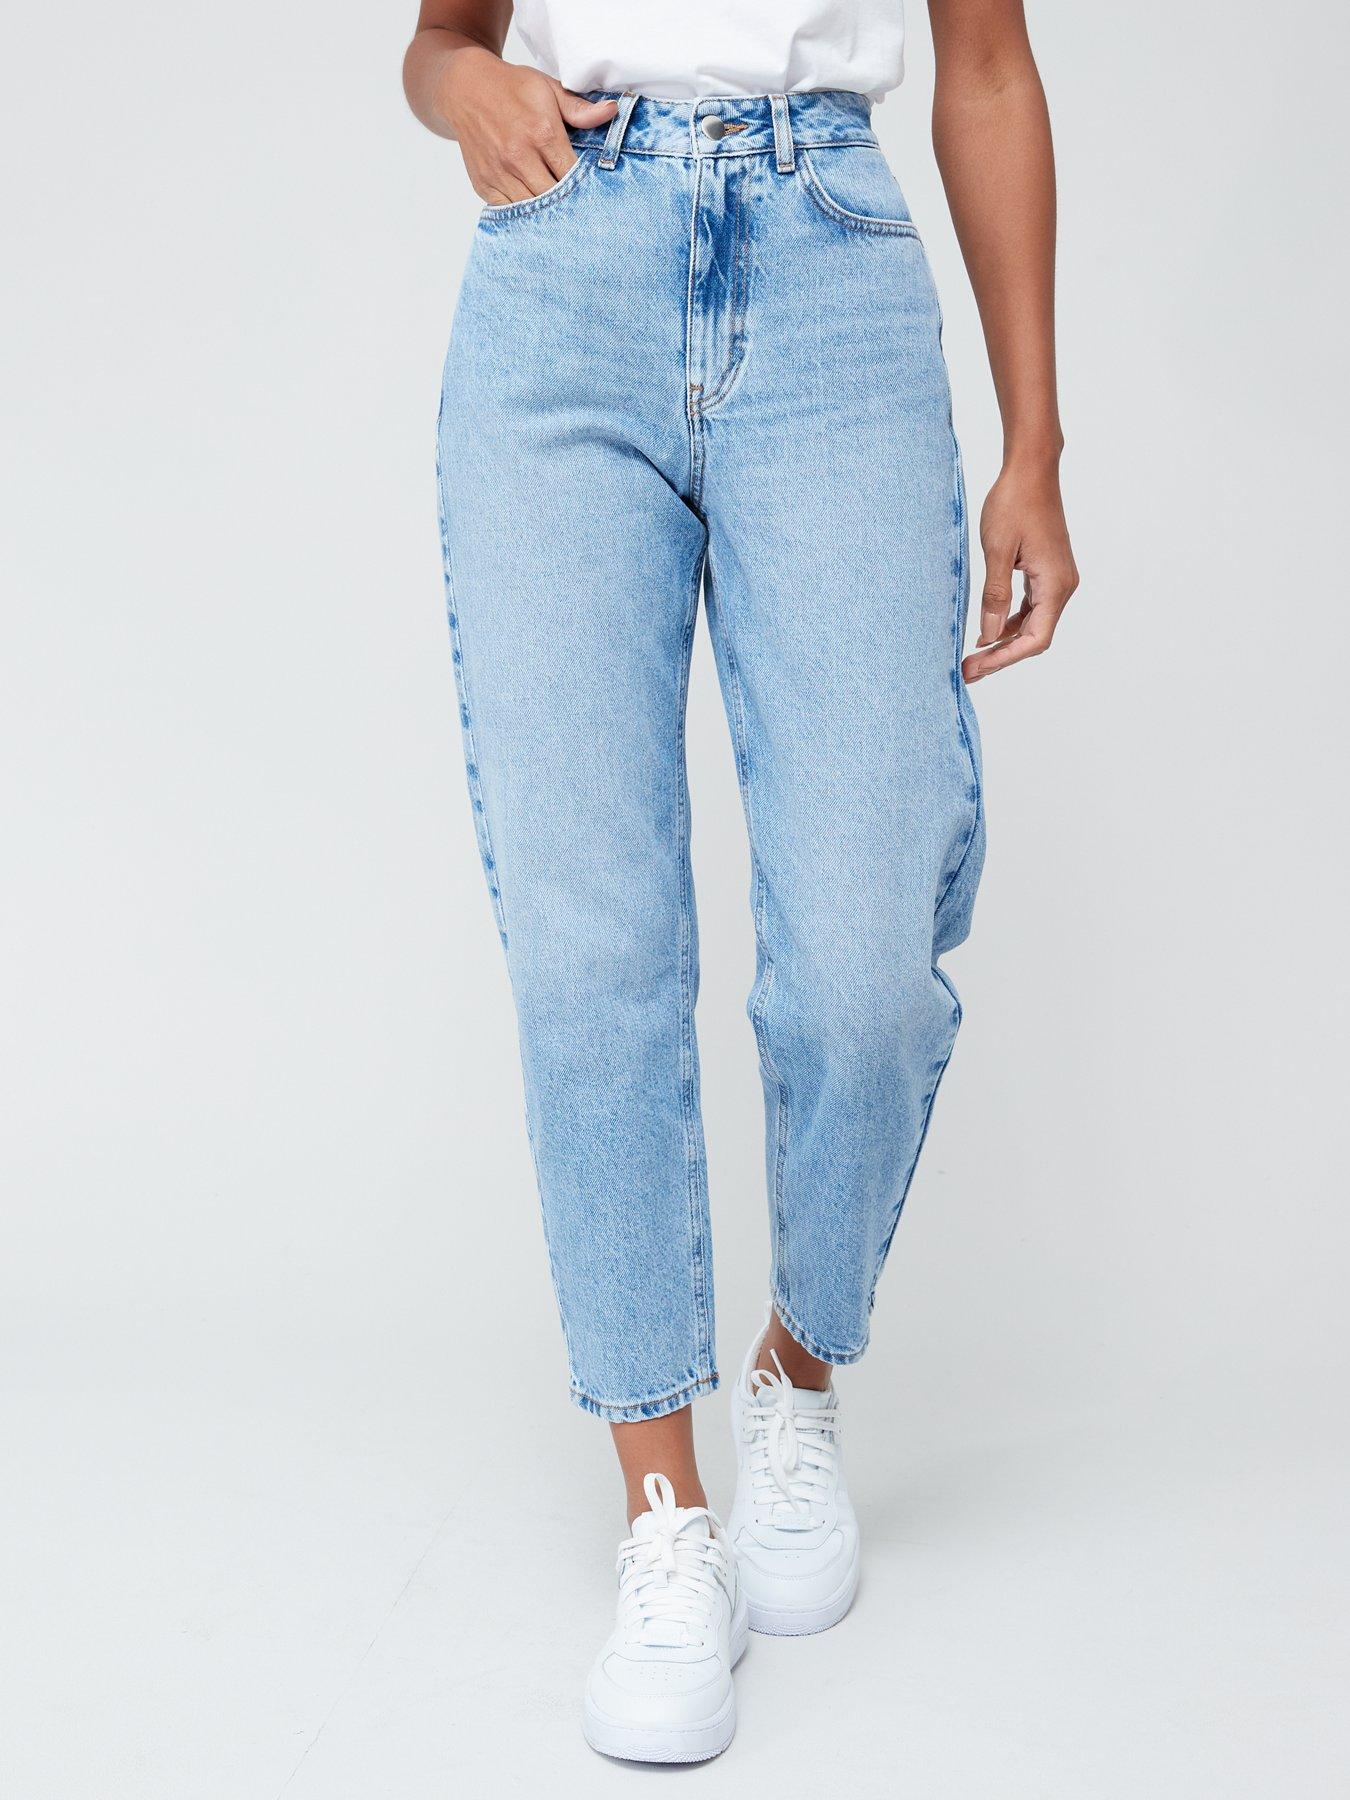 High Waisted Jeans, Women's Jeans